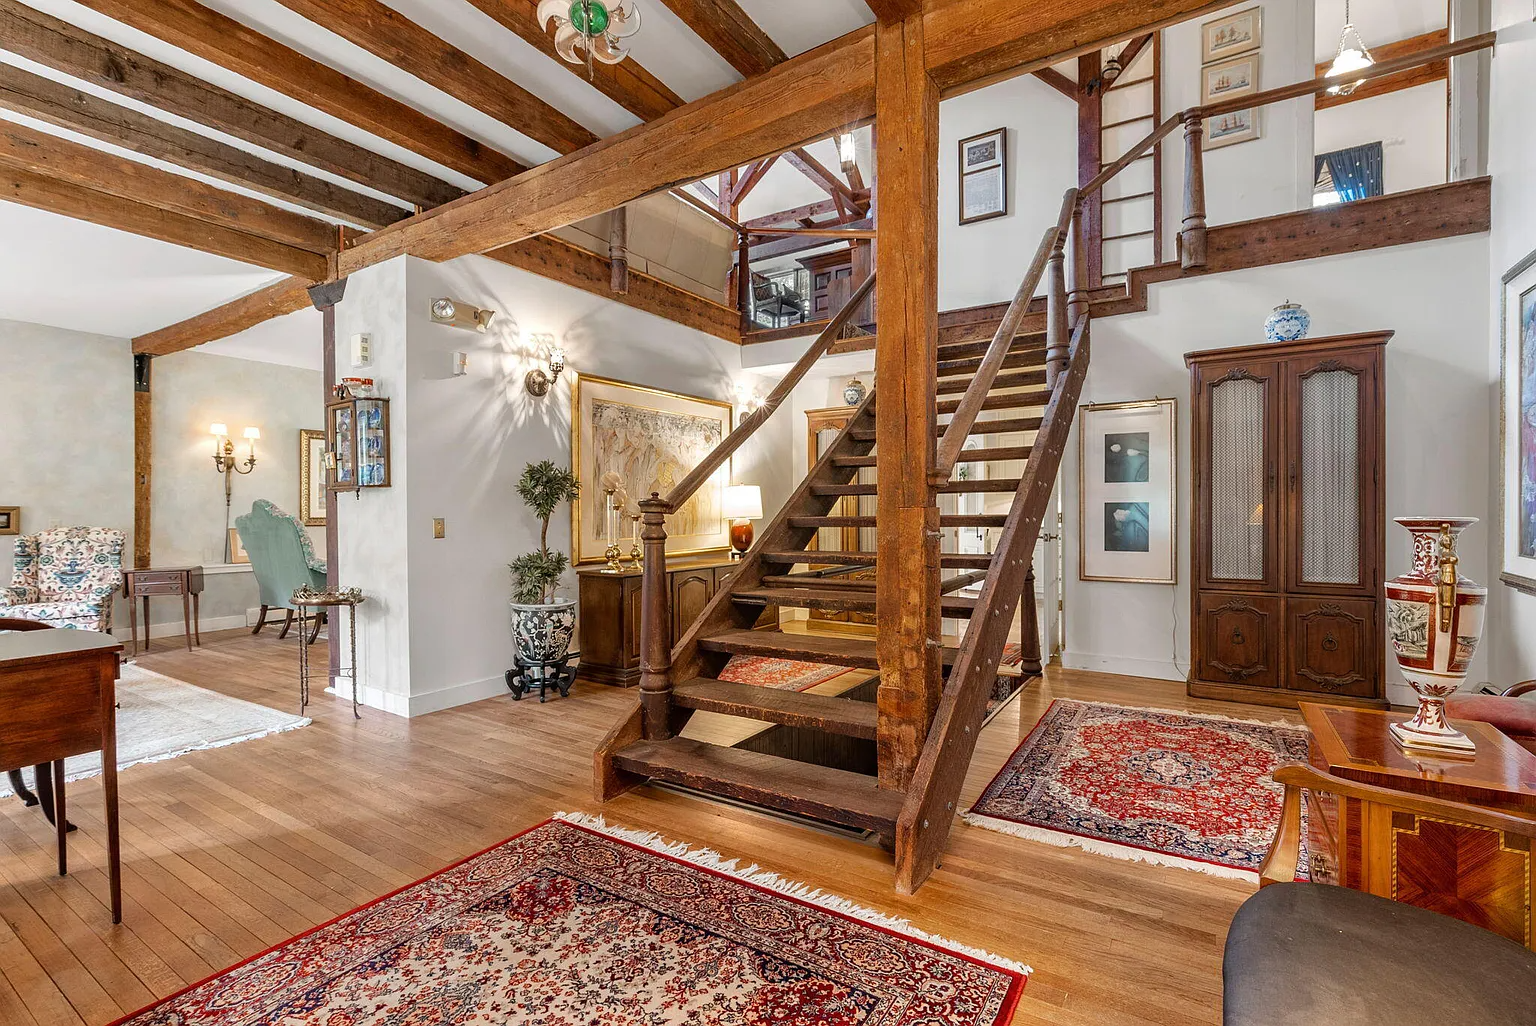 Entryway to Barnstable home with wooden beams, and grand staircase. 